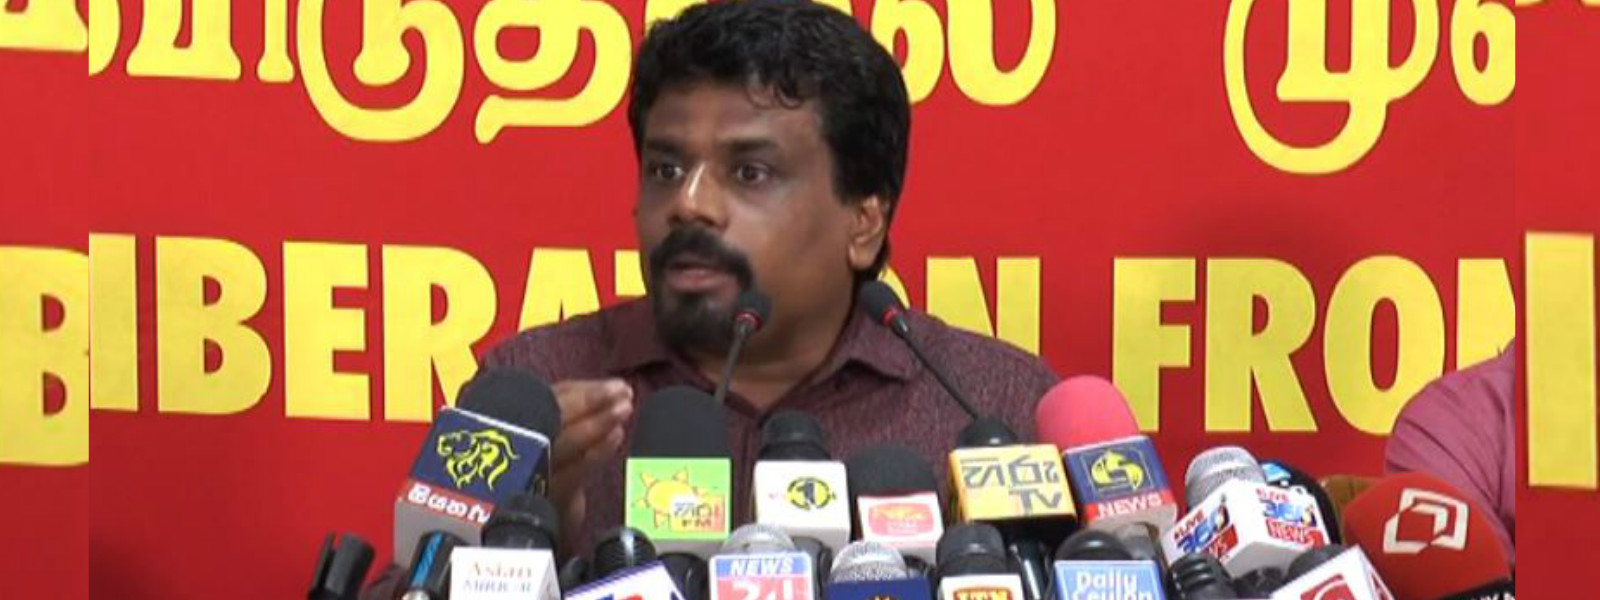 Reason MR took up the position of PM - Anura K